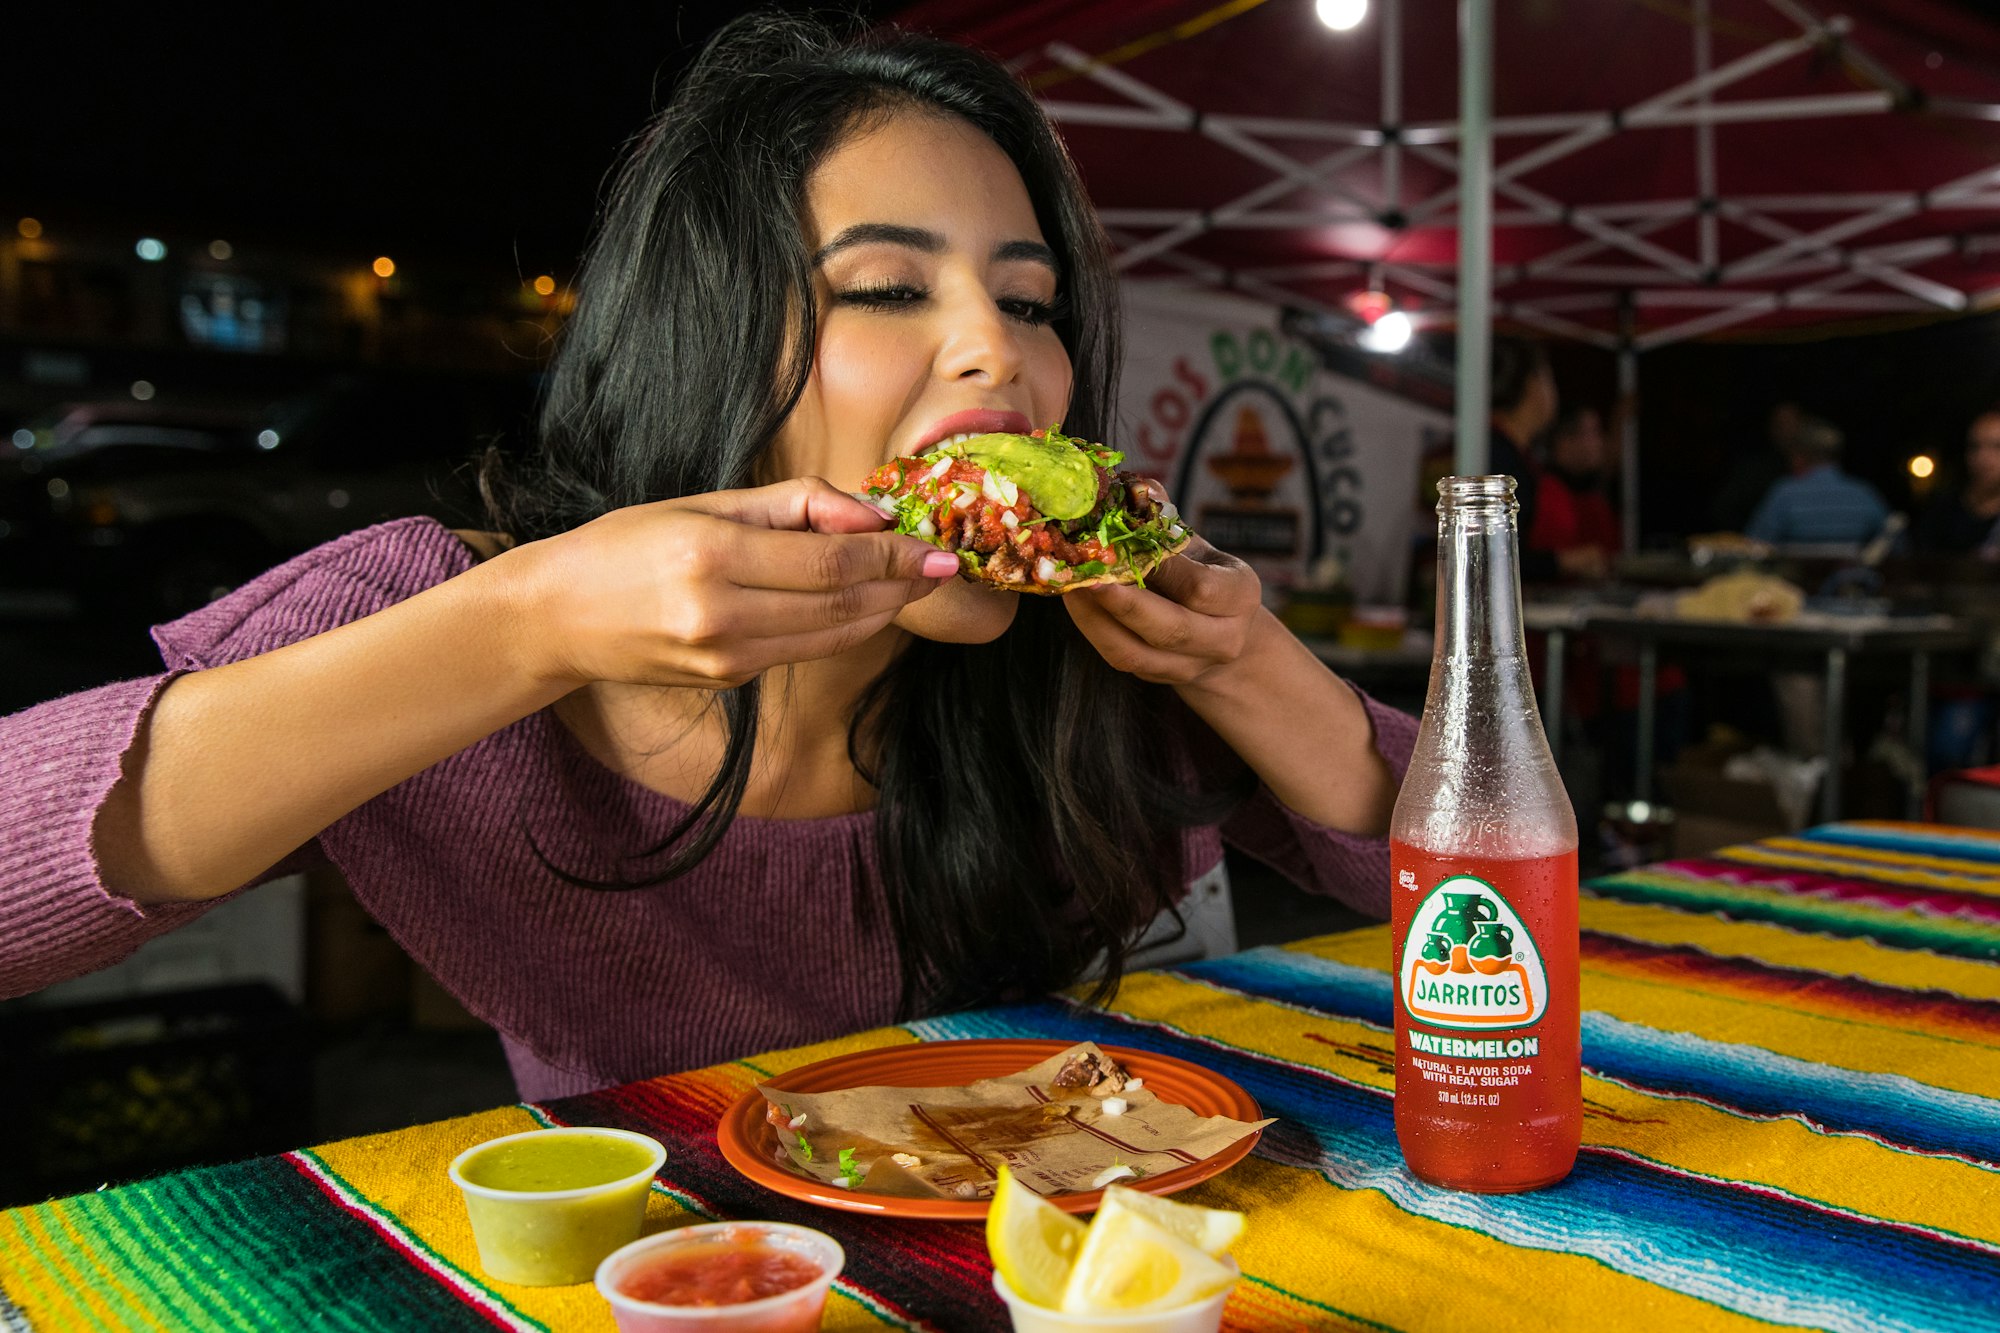 A woman eats a tostada at a street taco stand in Los Angeles at night.